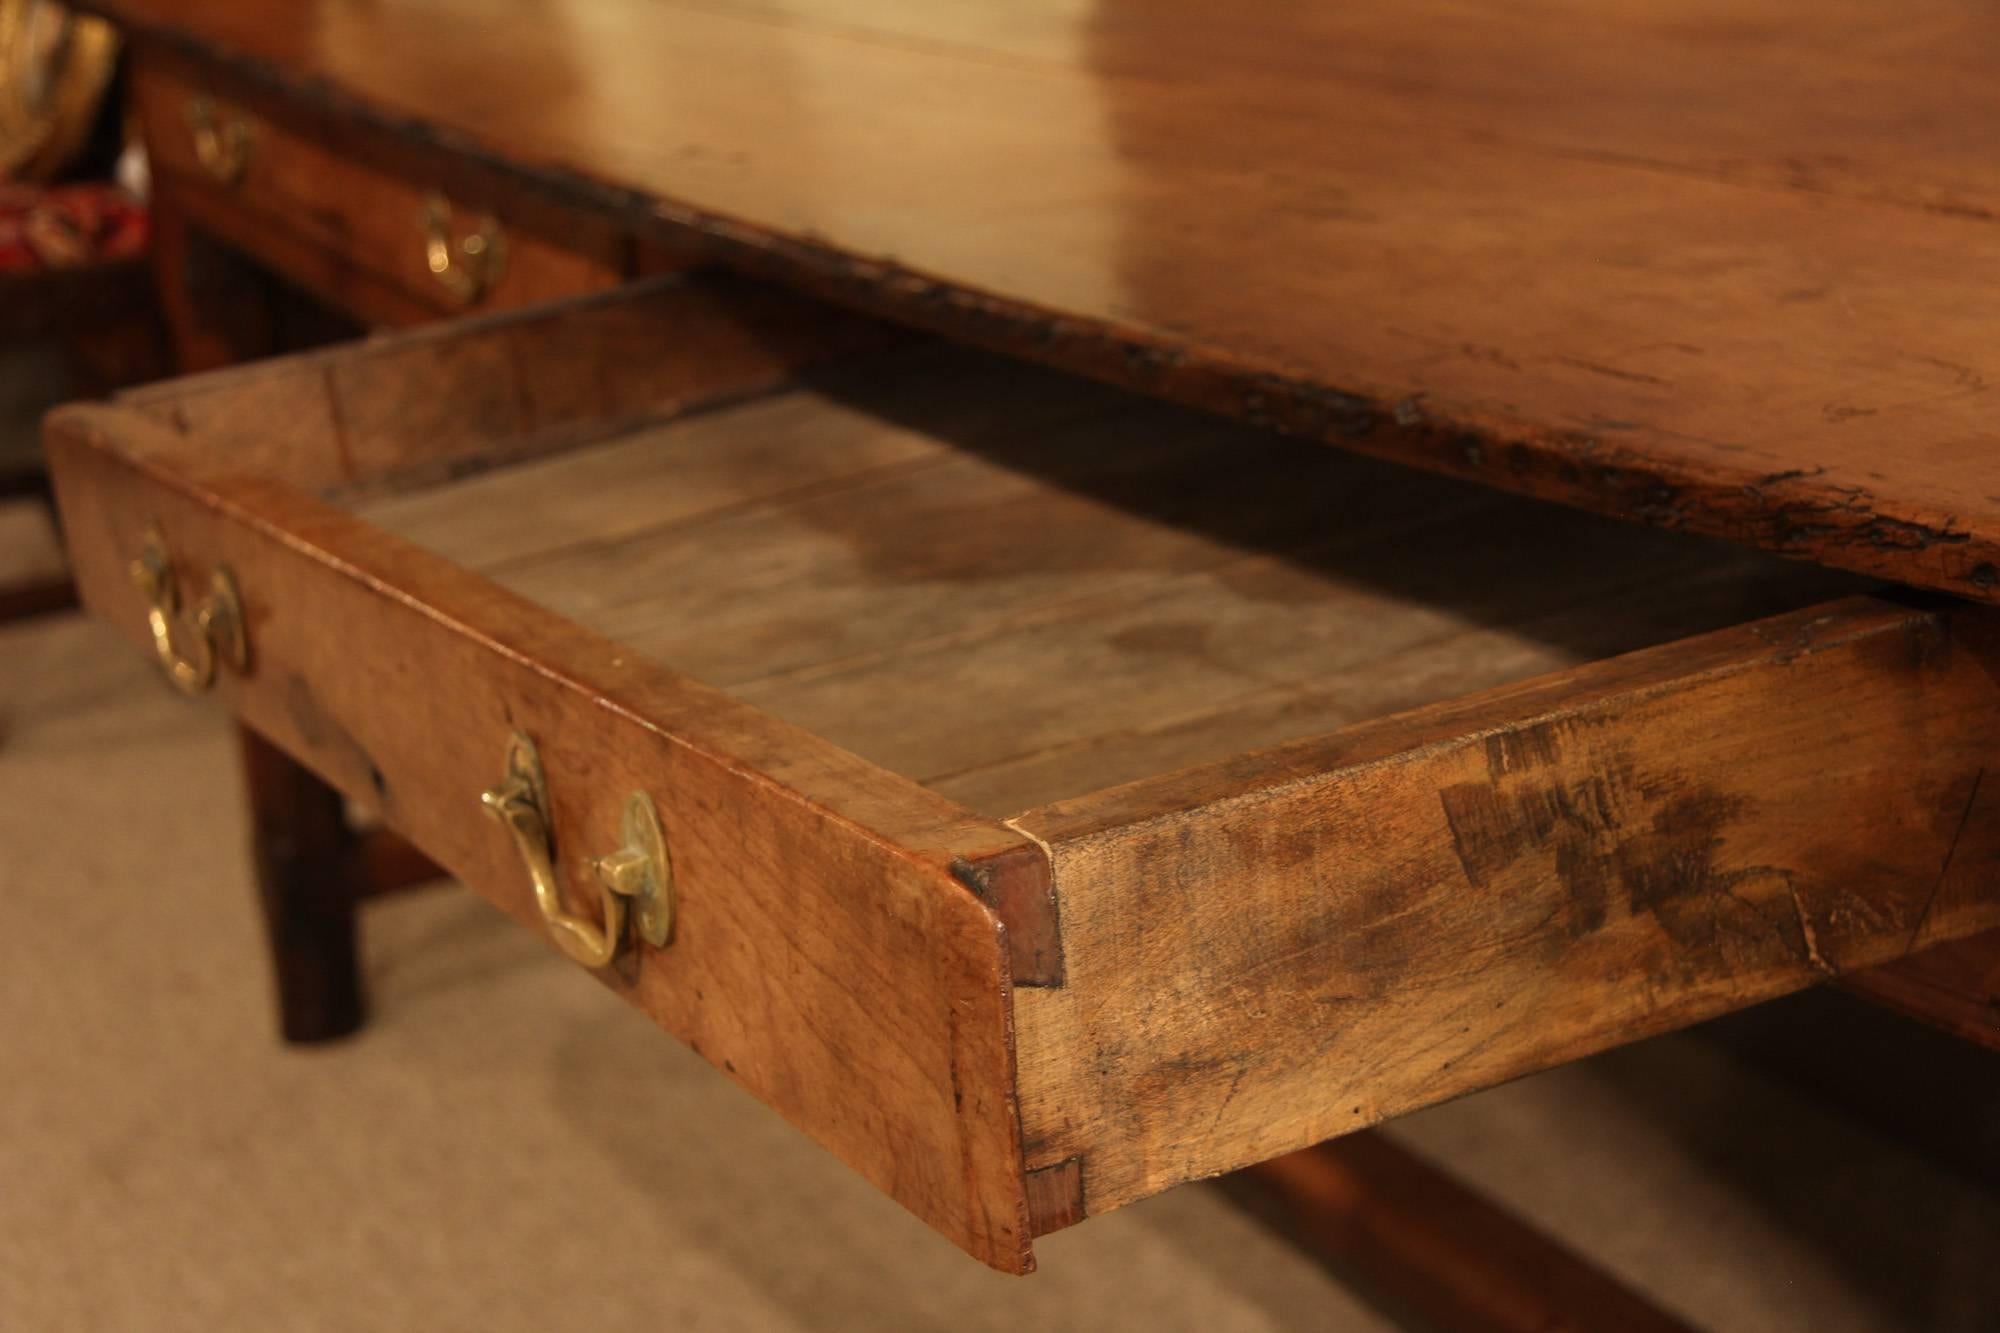 An early 19th century cherrywood French farmhouse table with two drawers.
 
 
All of the items that we advertise for sale have been as accurately described as possible and are in excellent condition, unless otherwise stated. Please note that we